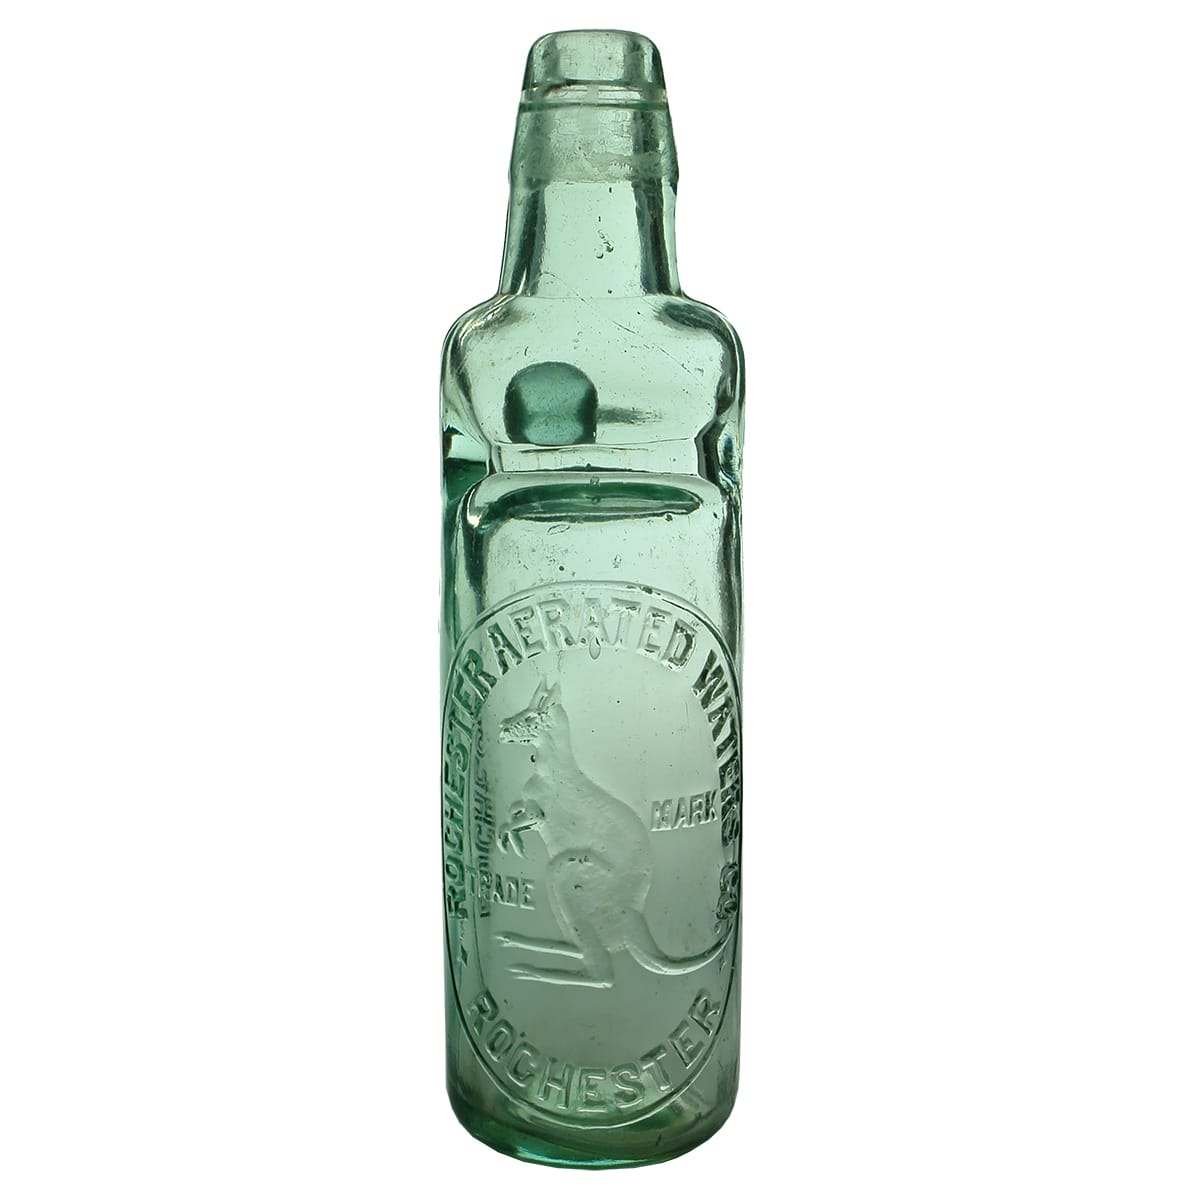 Rochester Aerated Waters Co. codd, 10 oz.